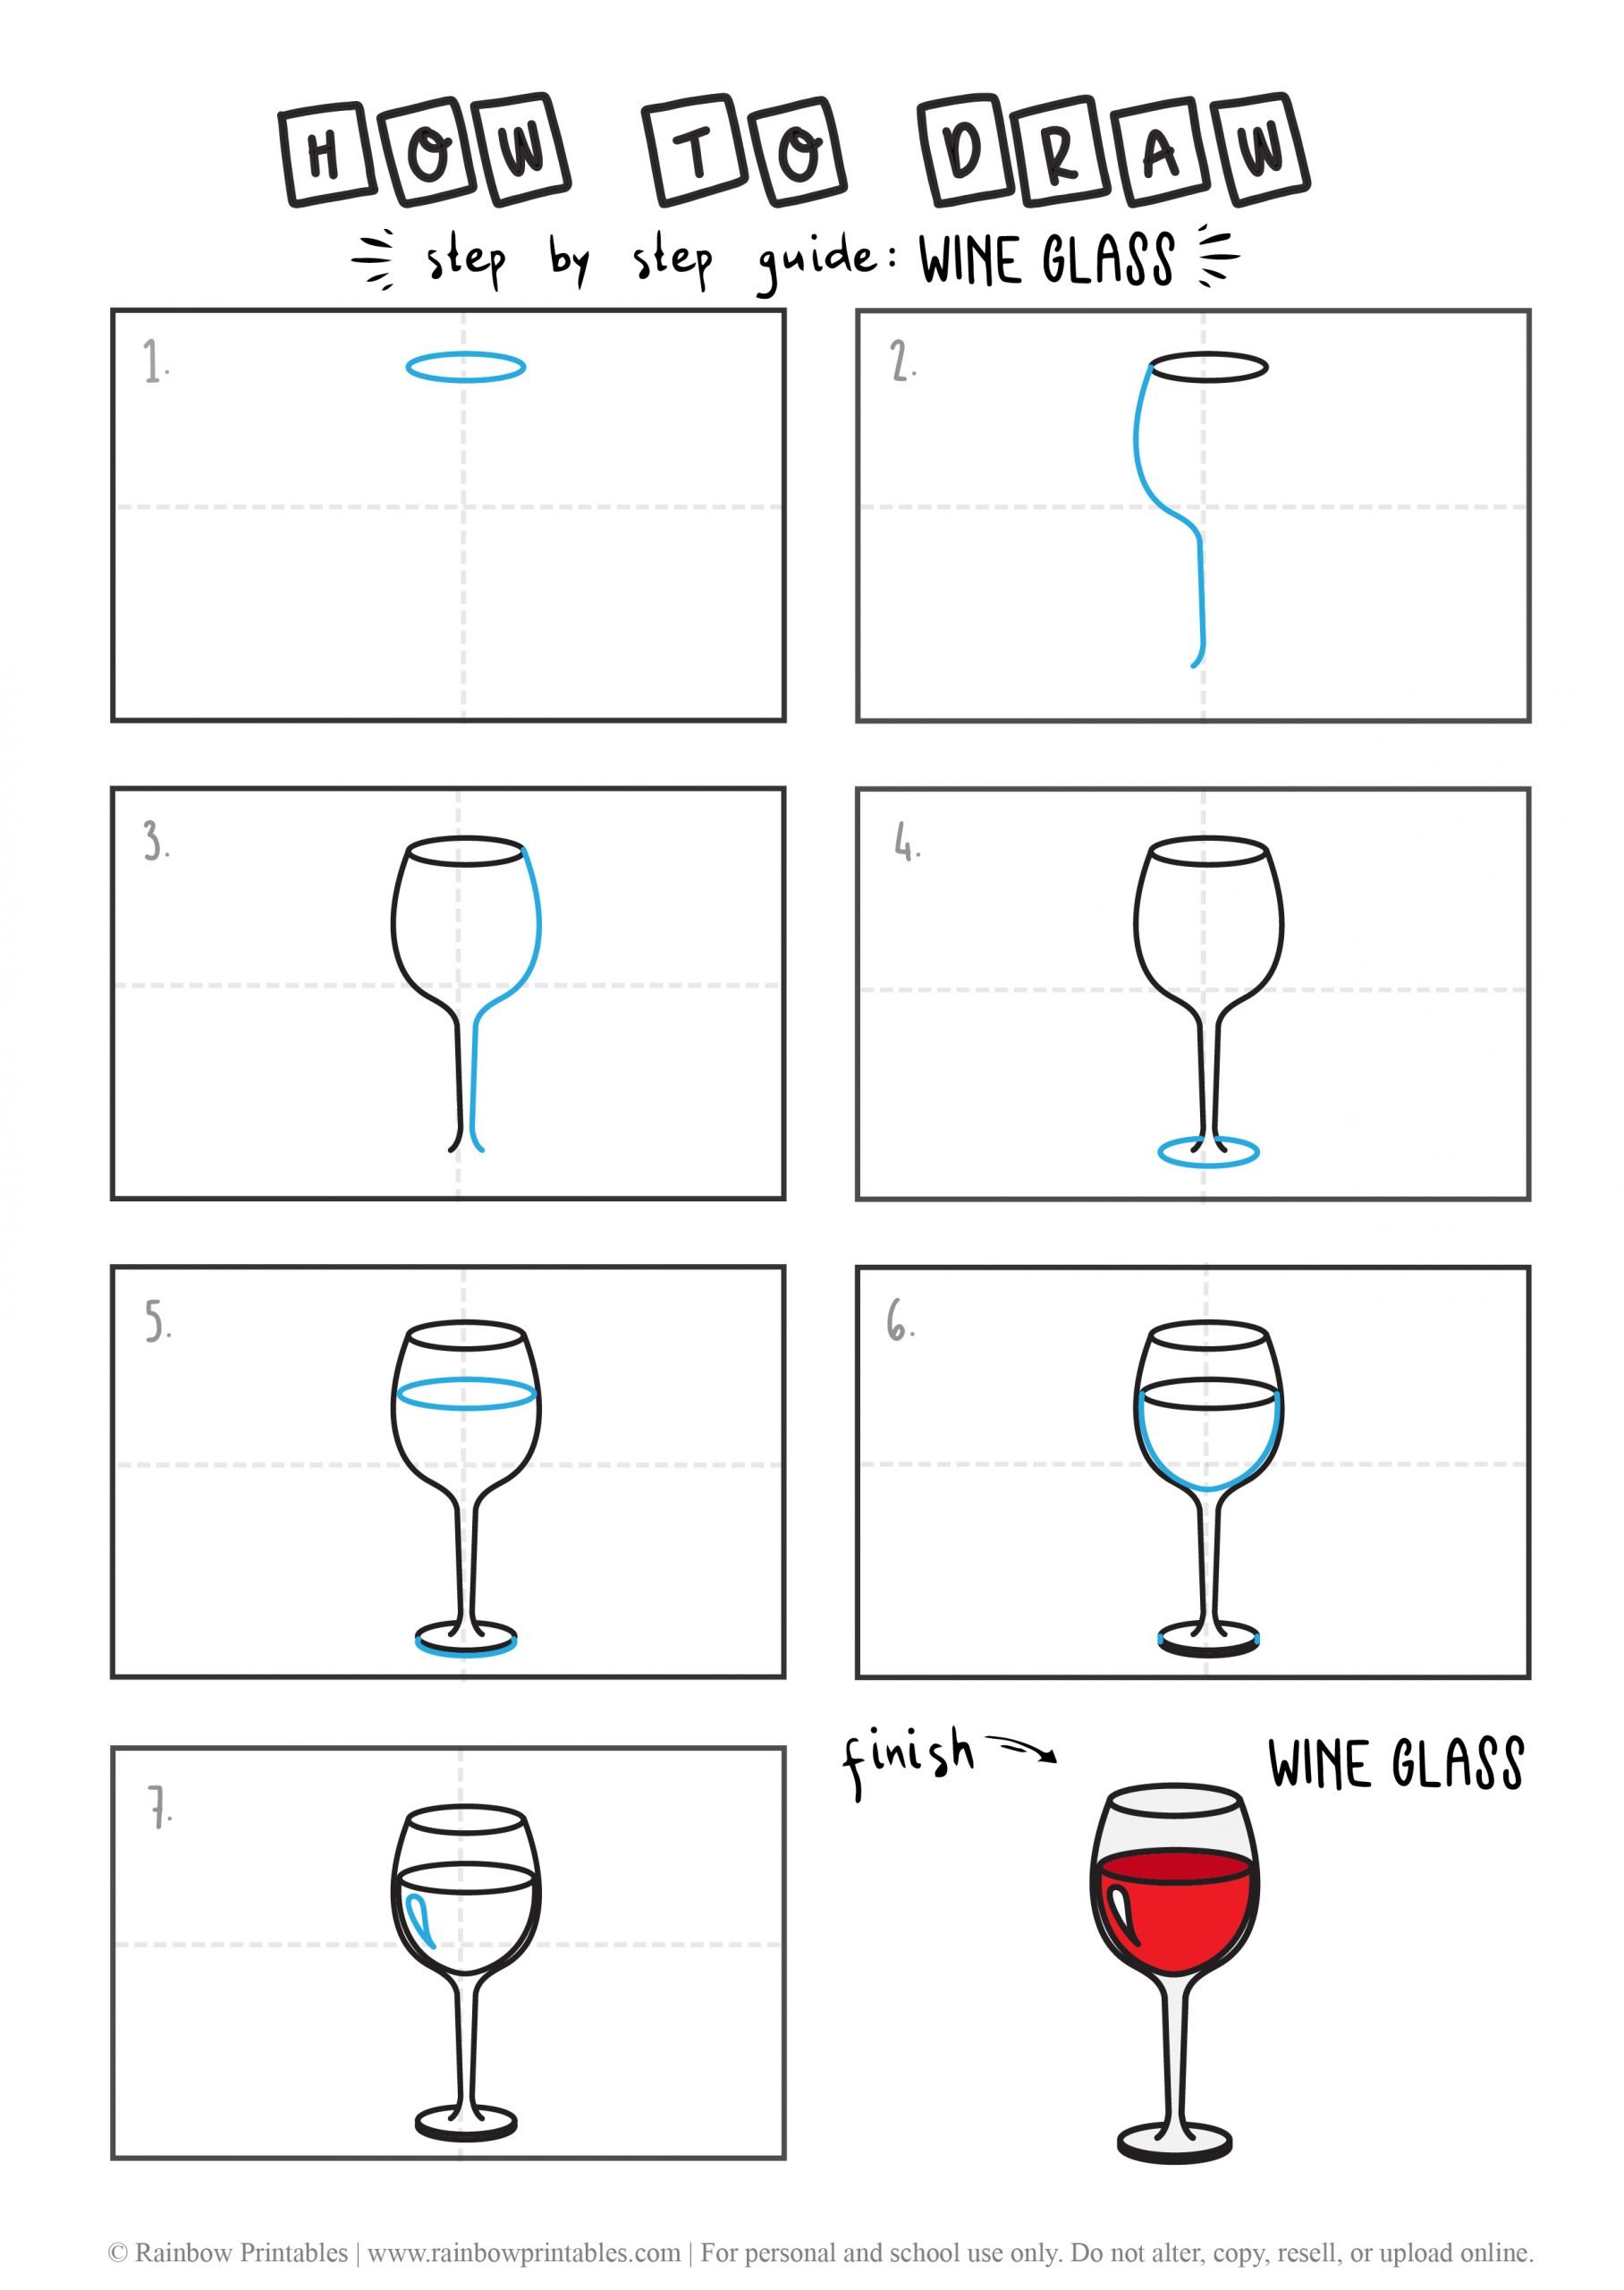 HOW TO DRAW A WINE GLASSES WITH RED WINE GUIDE ILLUSTRATION STEP BY STEP EASY SIMPLE FOR KIDS